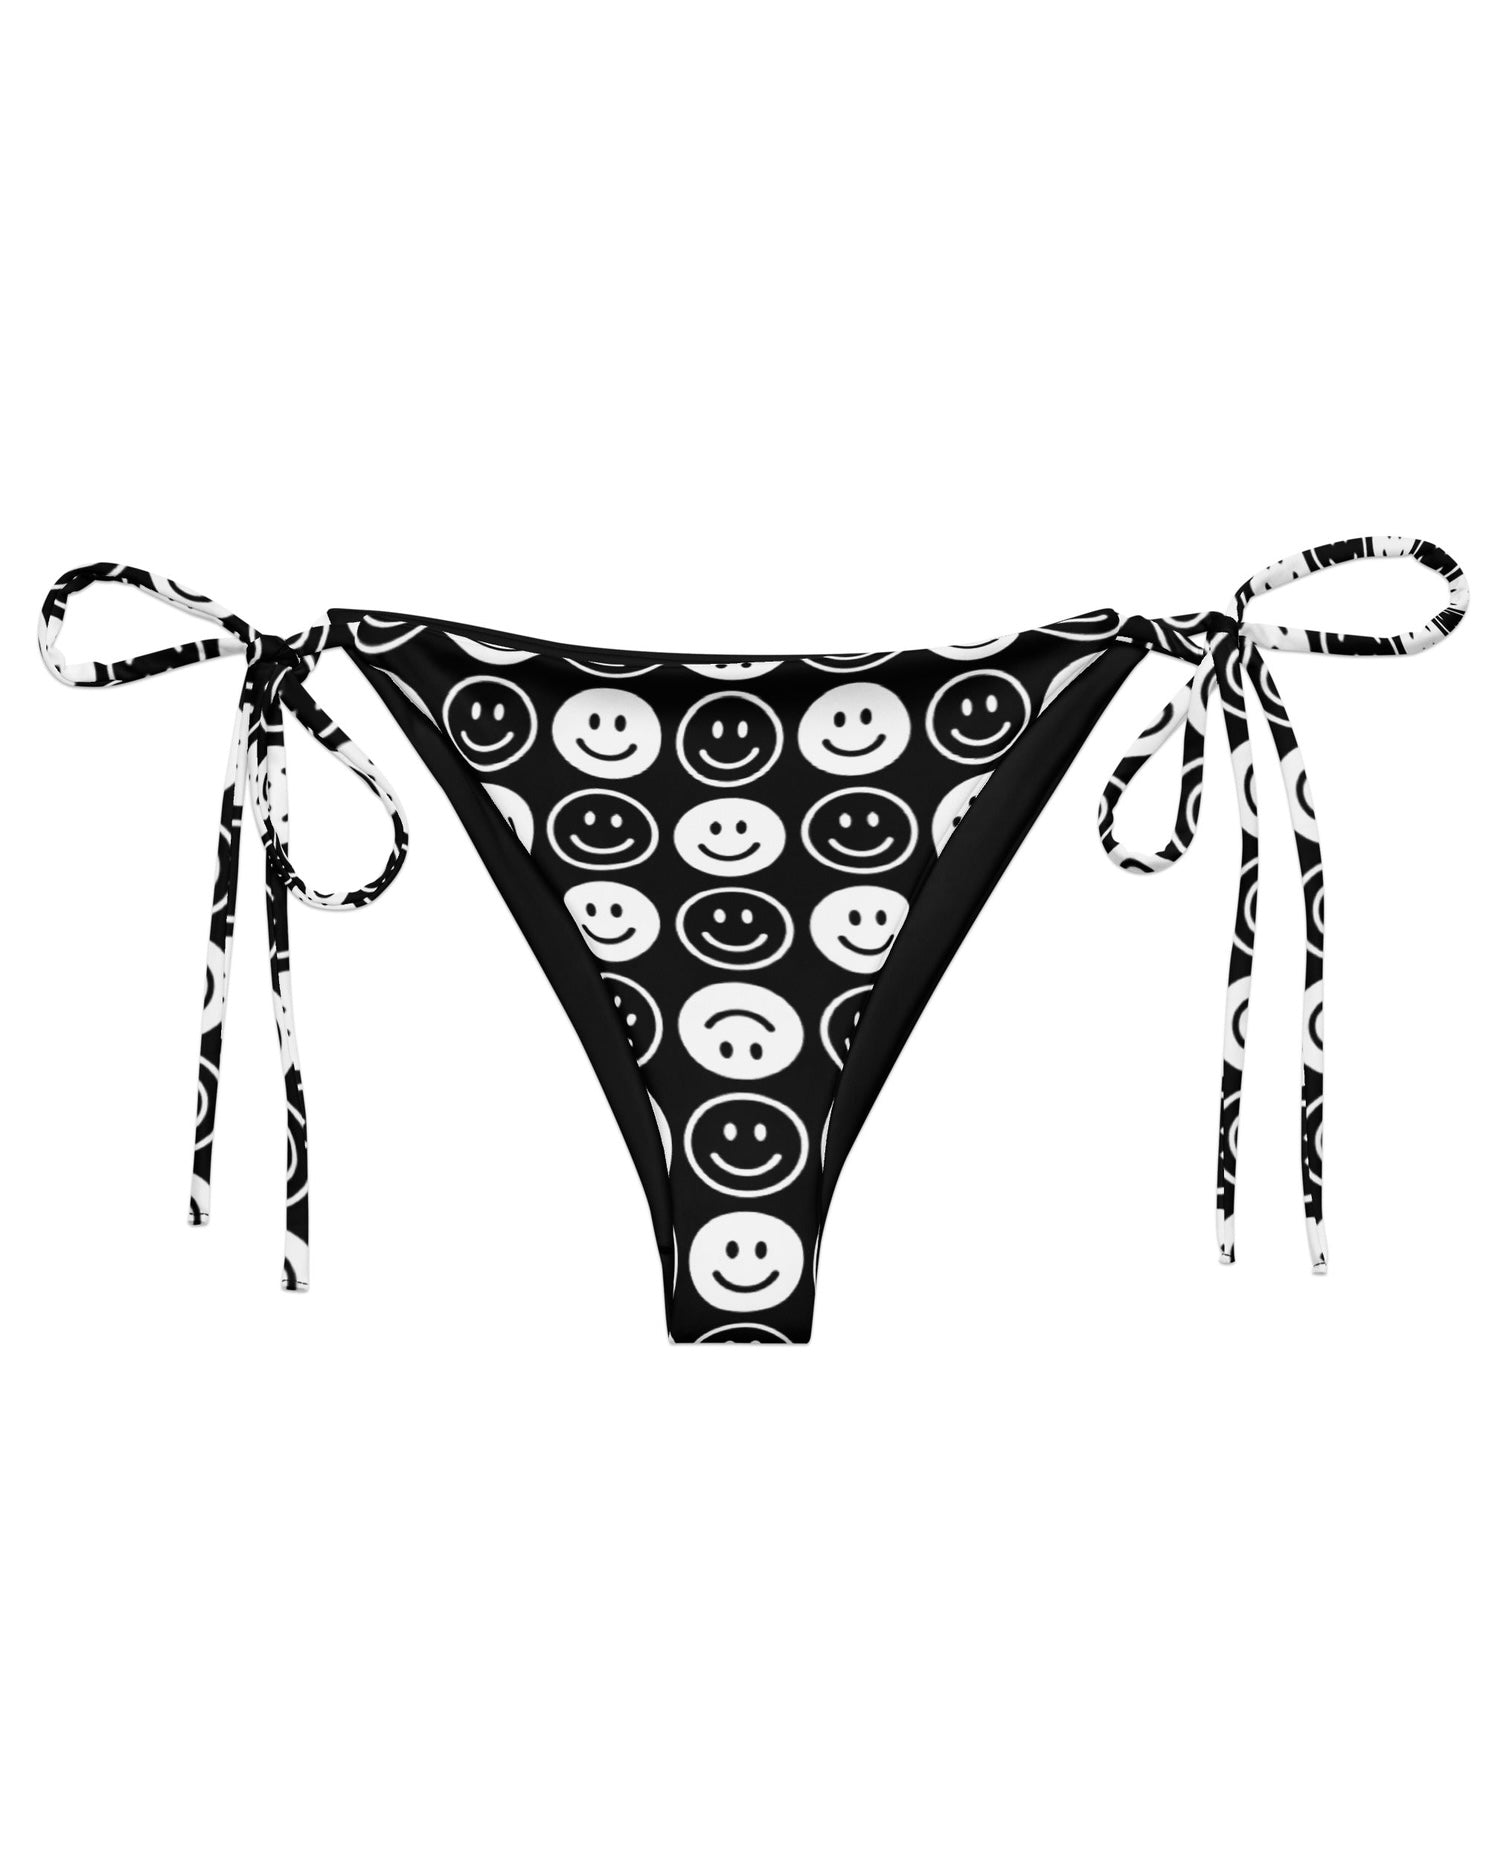 The All Smiles String Bottoms by One Stop Rave on a white background.